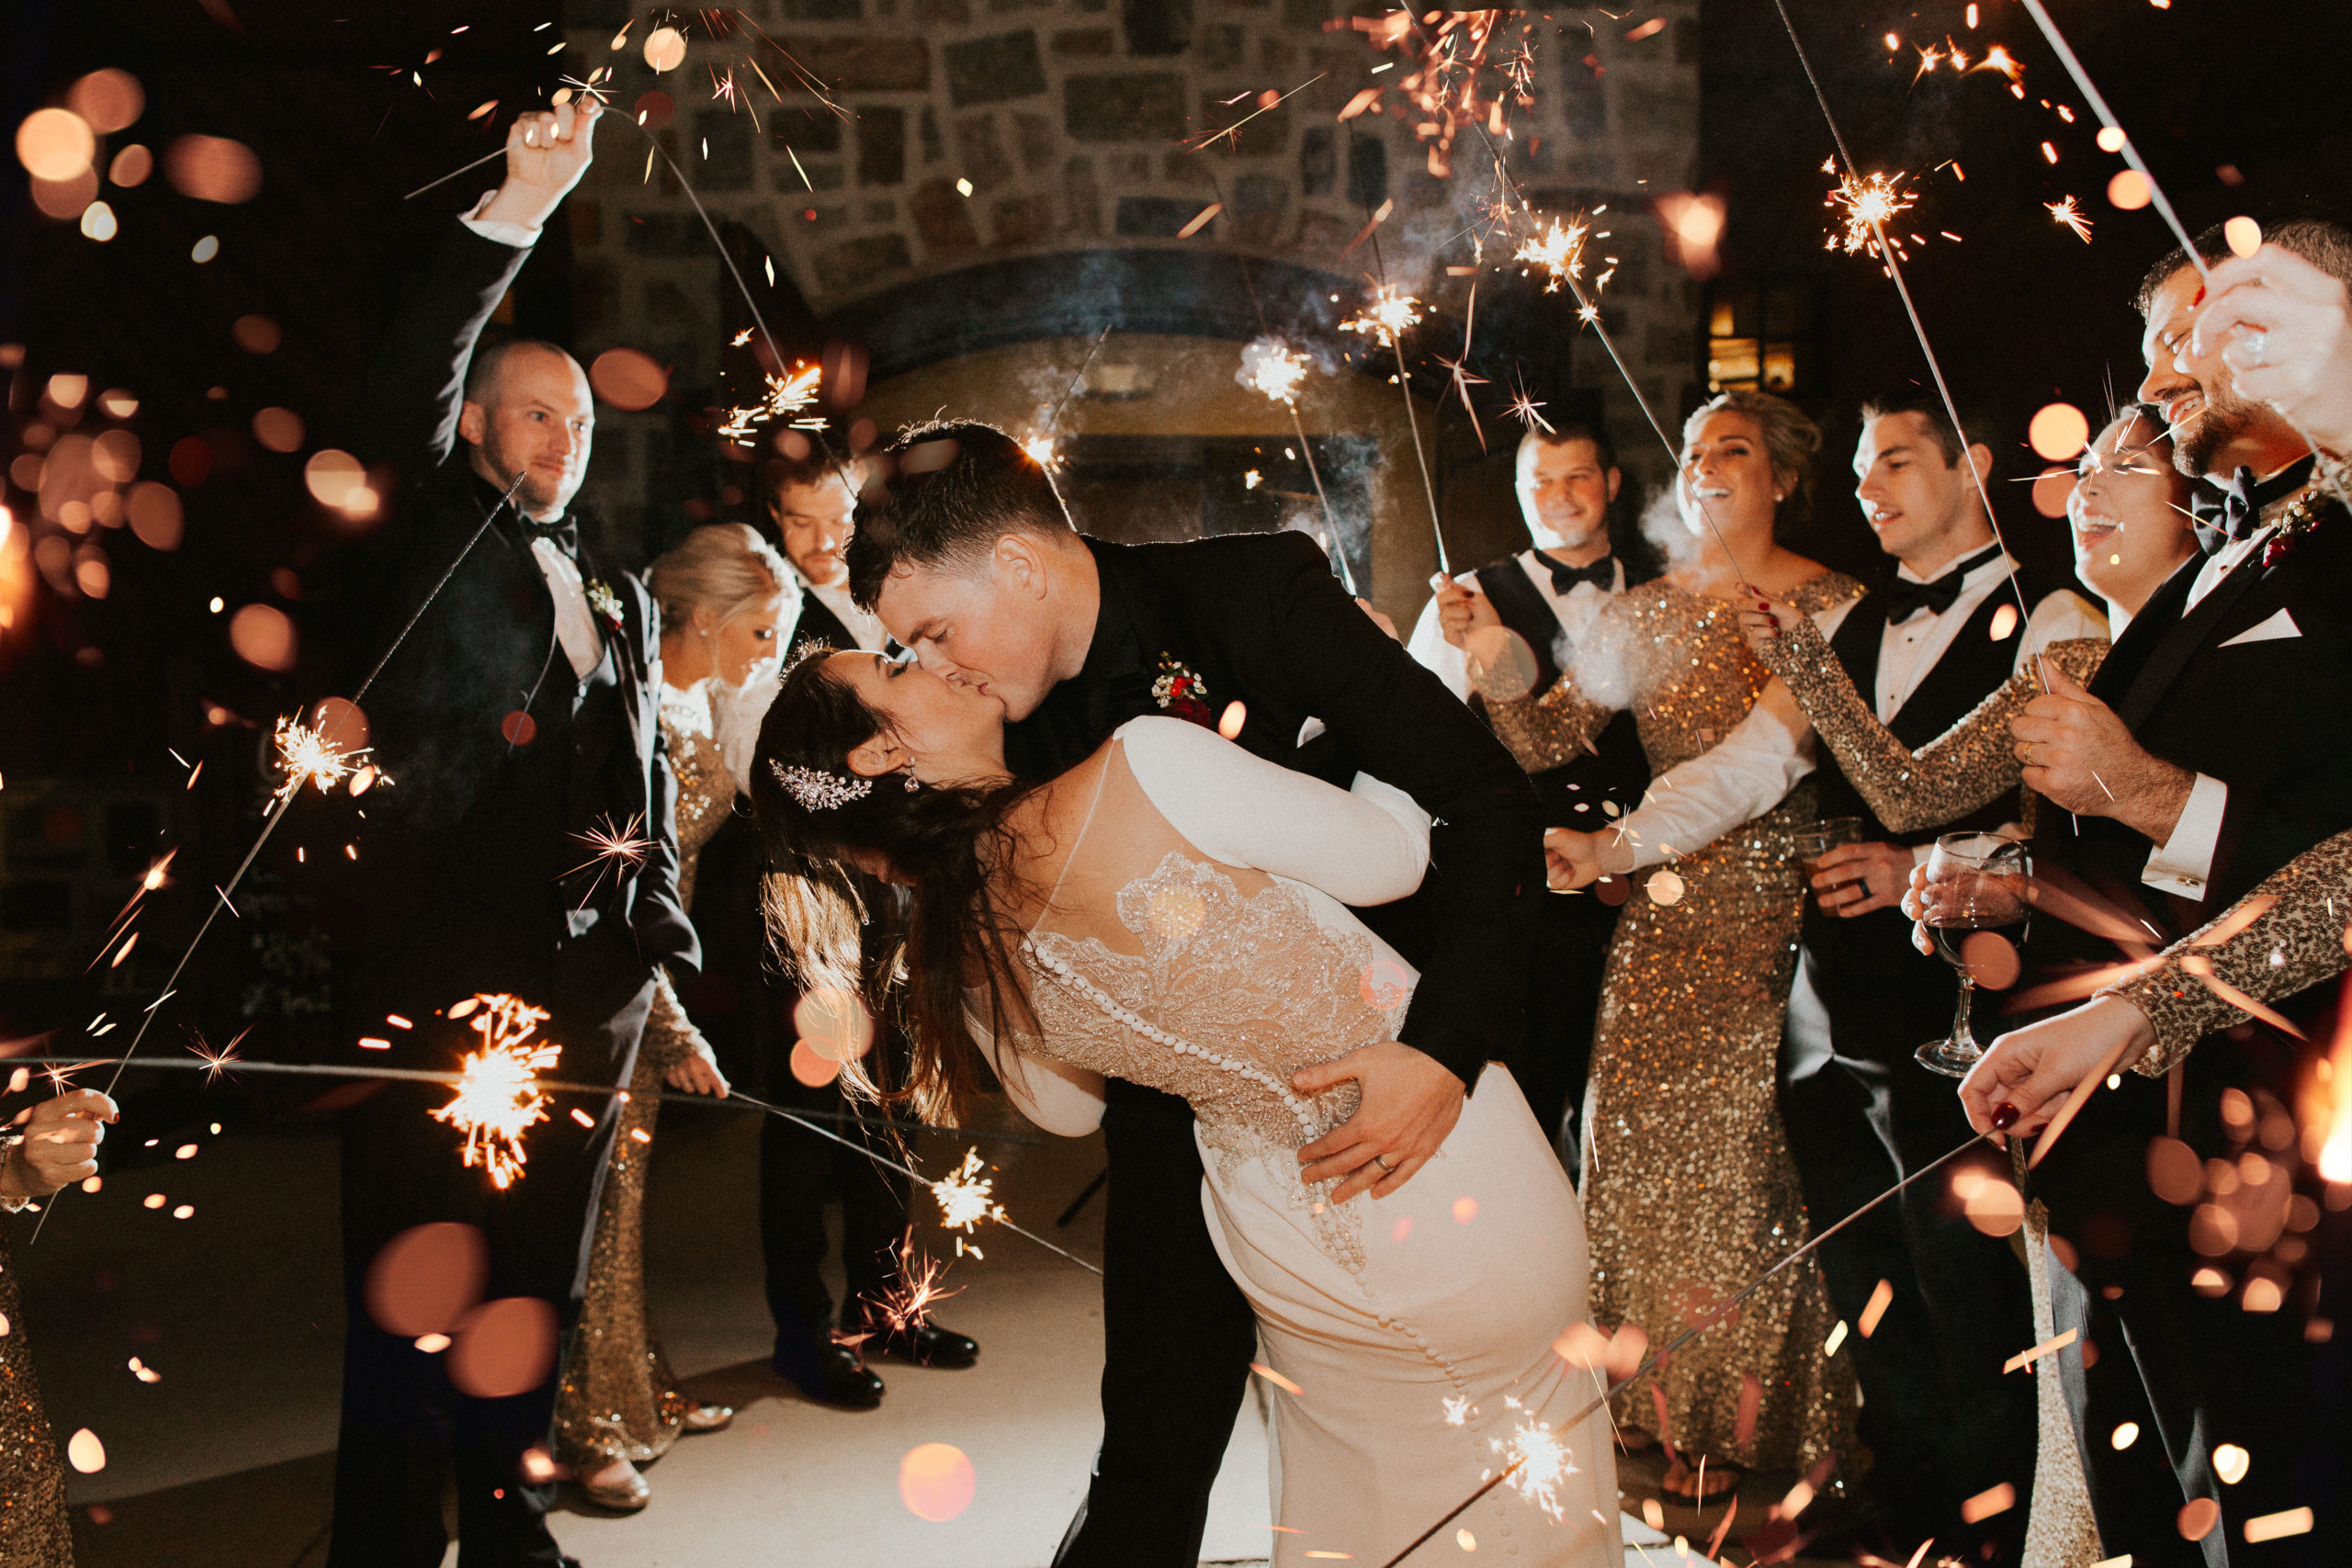 How to Have Amazing Wedding and Engagement Photos by Sarah Anne Photo